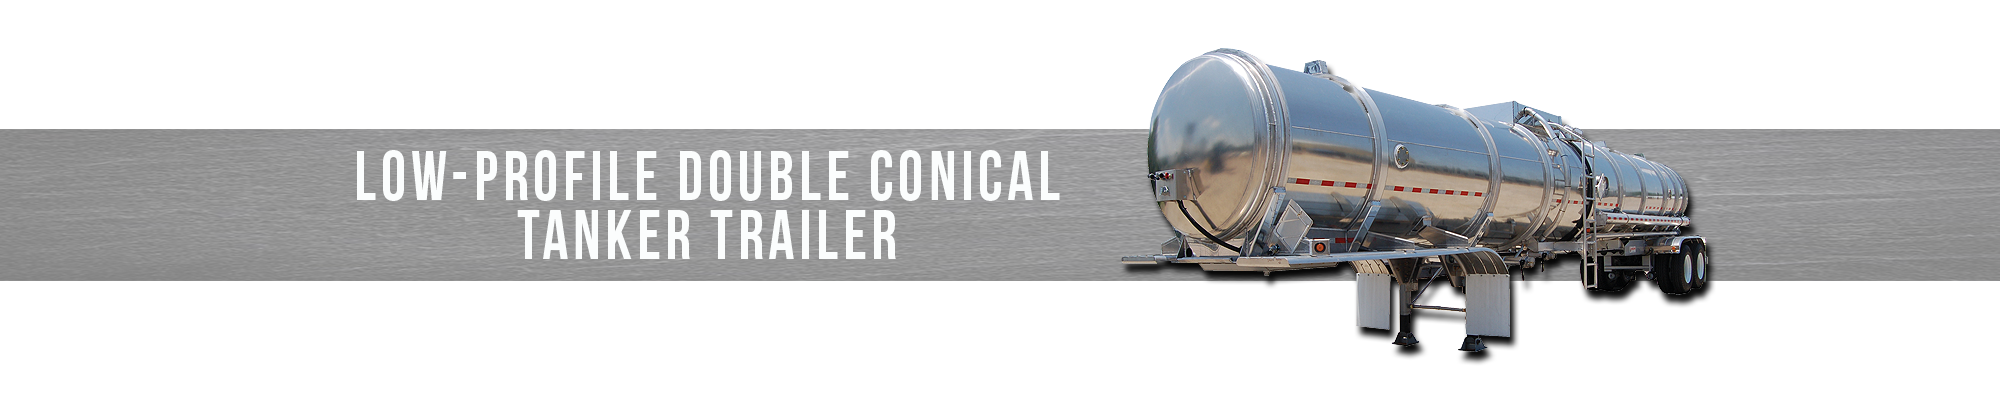 Low-Profile Double Conical Tanker Trailer